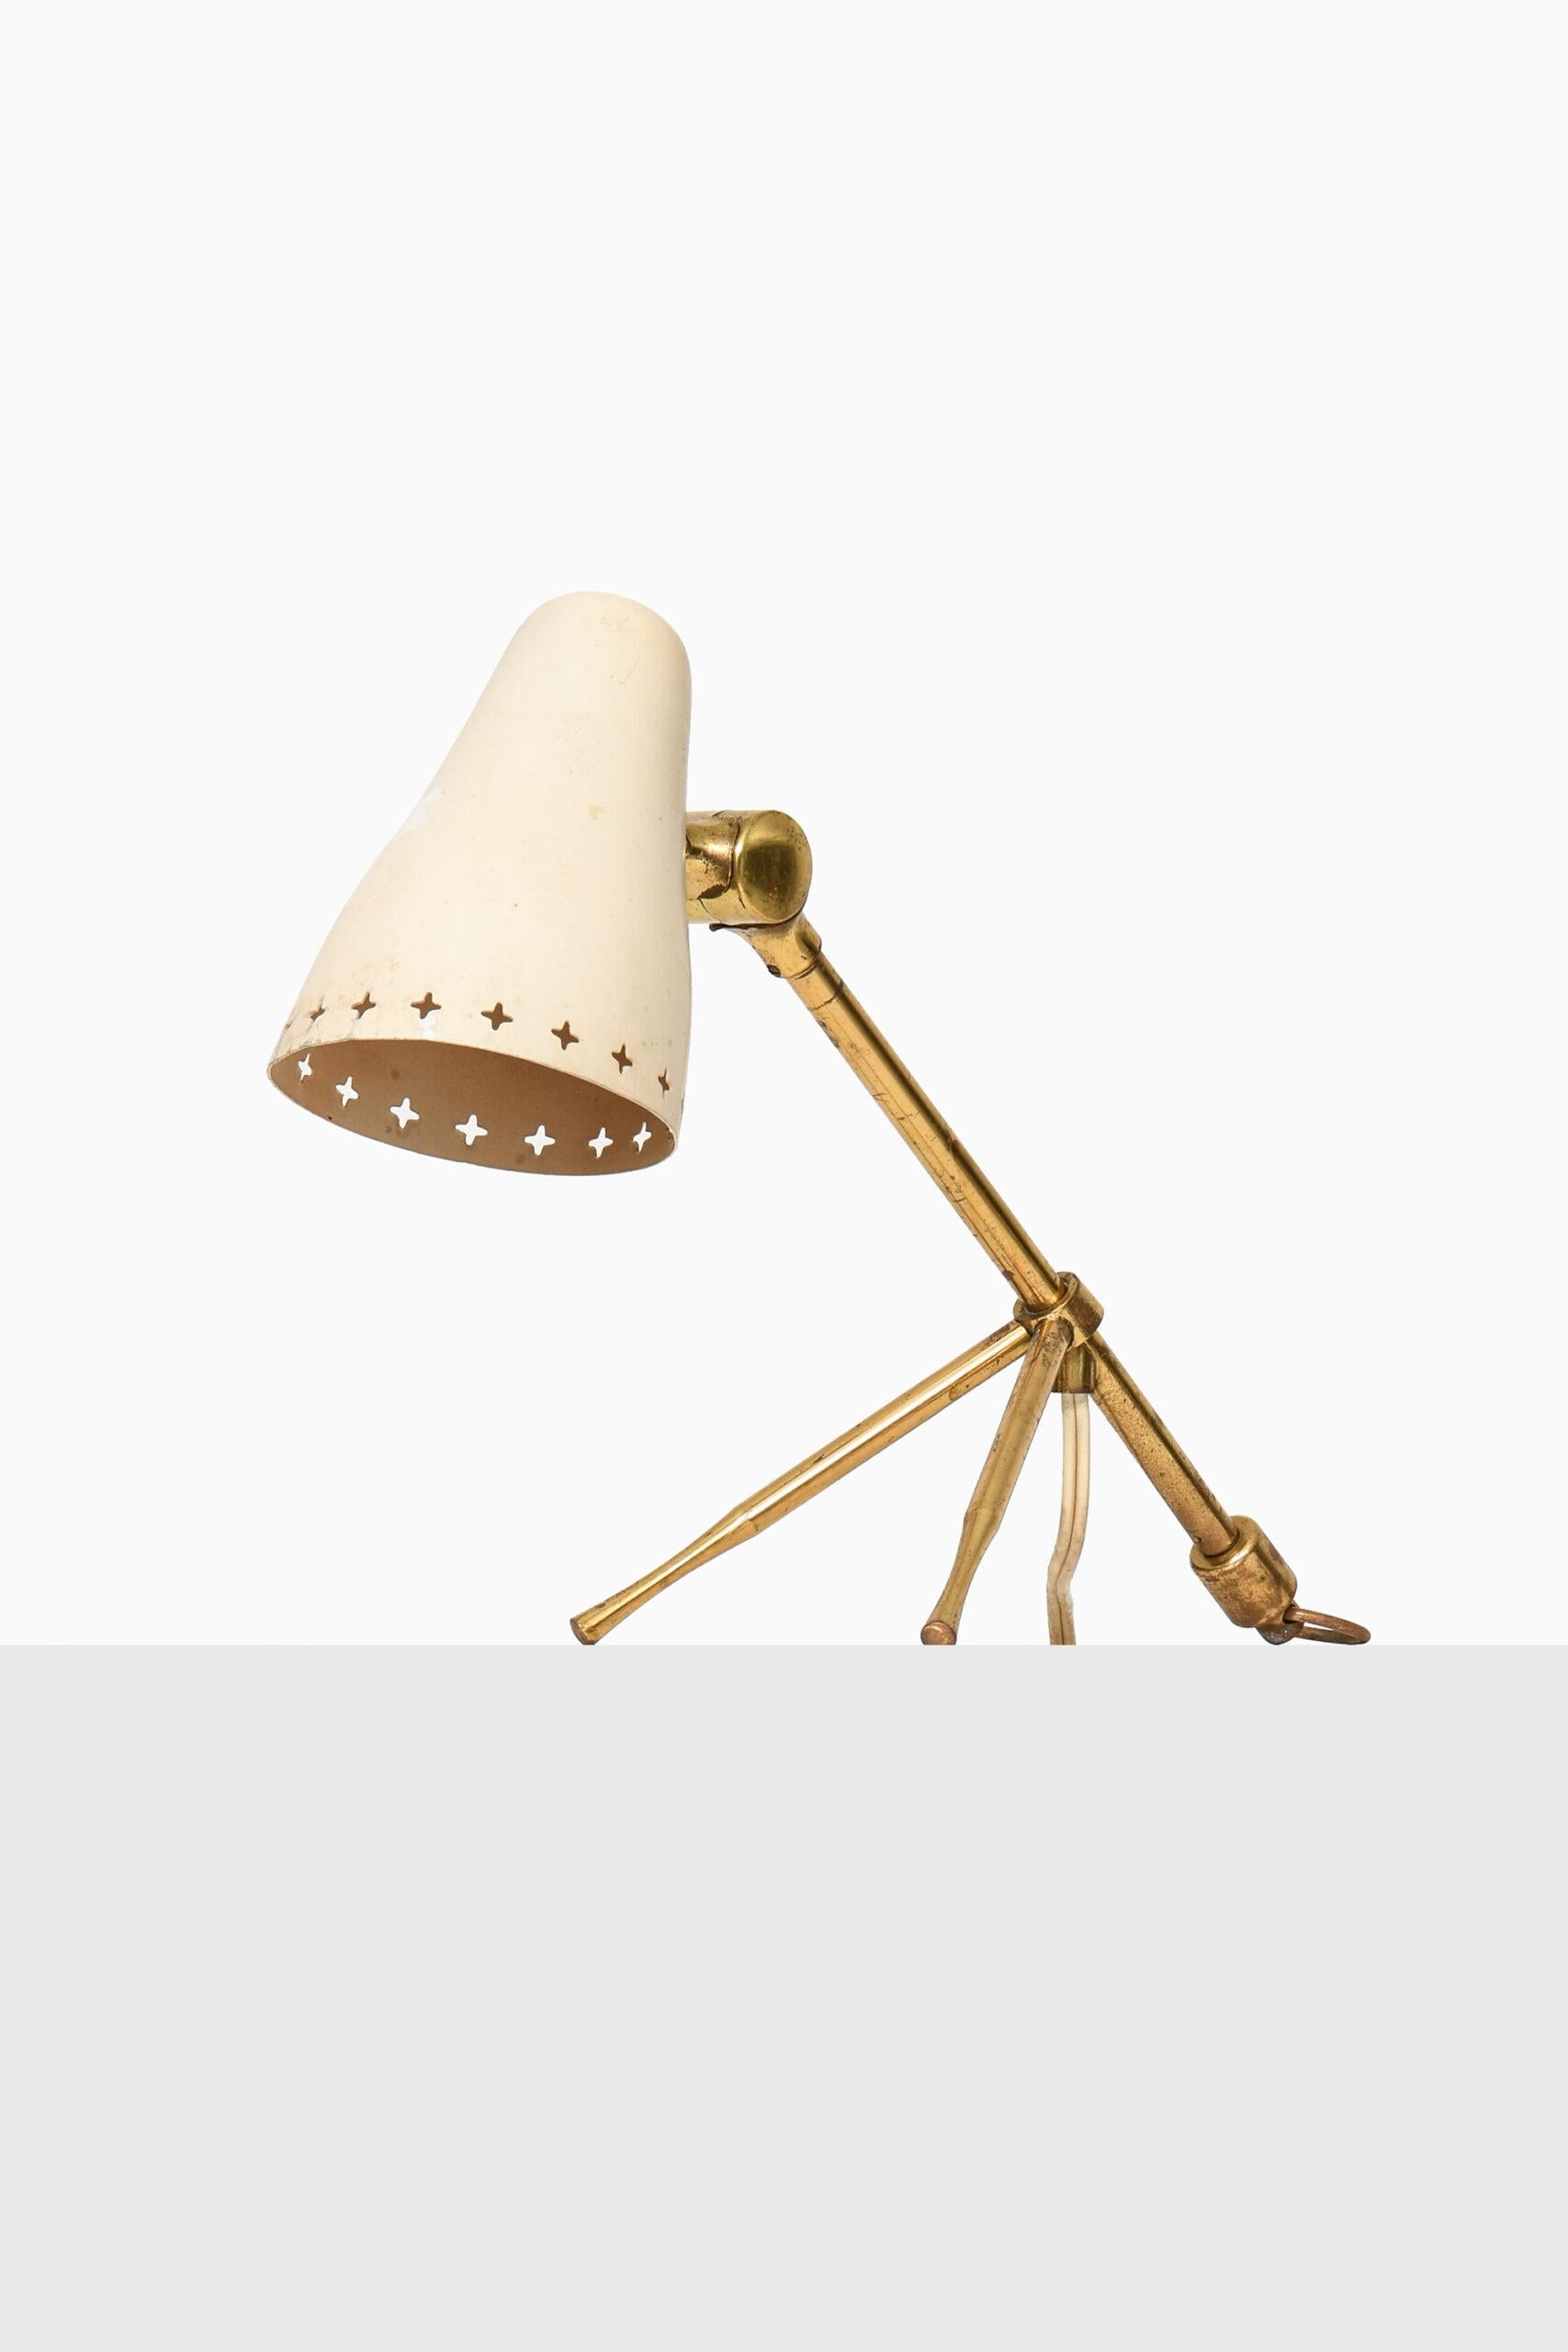 Rare table / wall lamp designed by Boris Lacroix. Produced by Falkenbergs Belysning in Sweden.